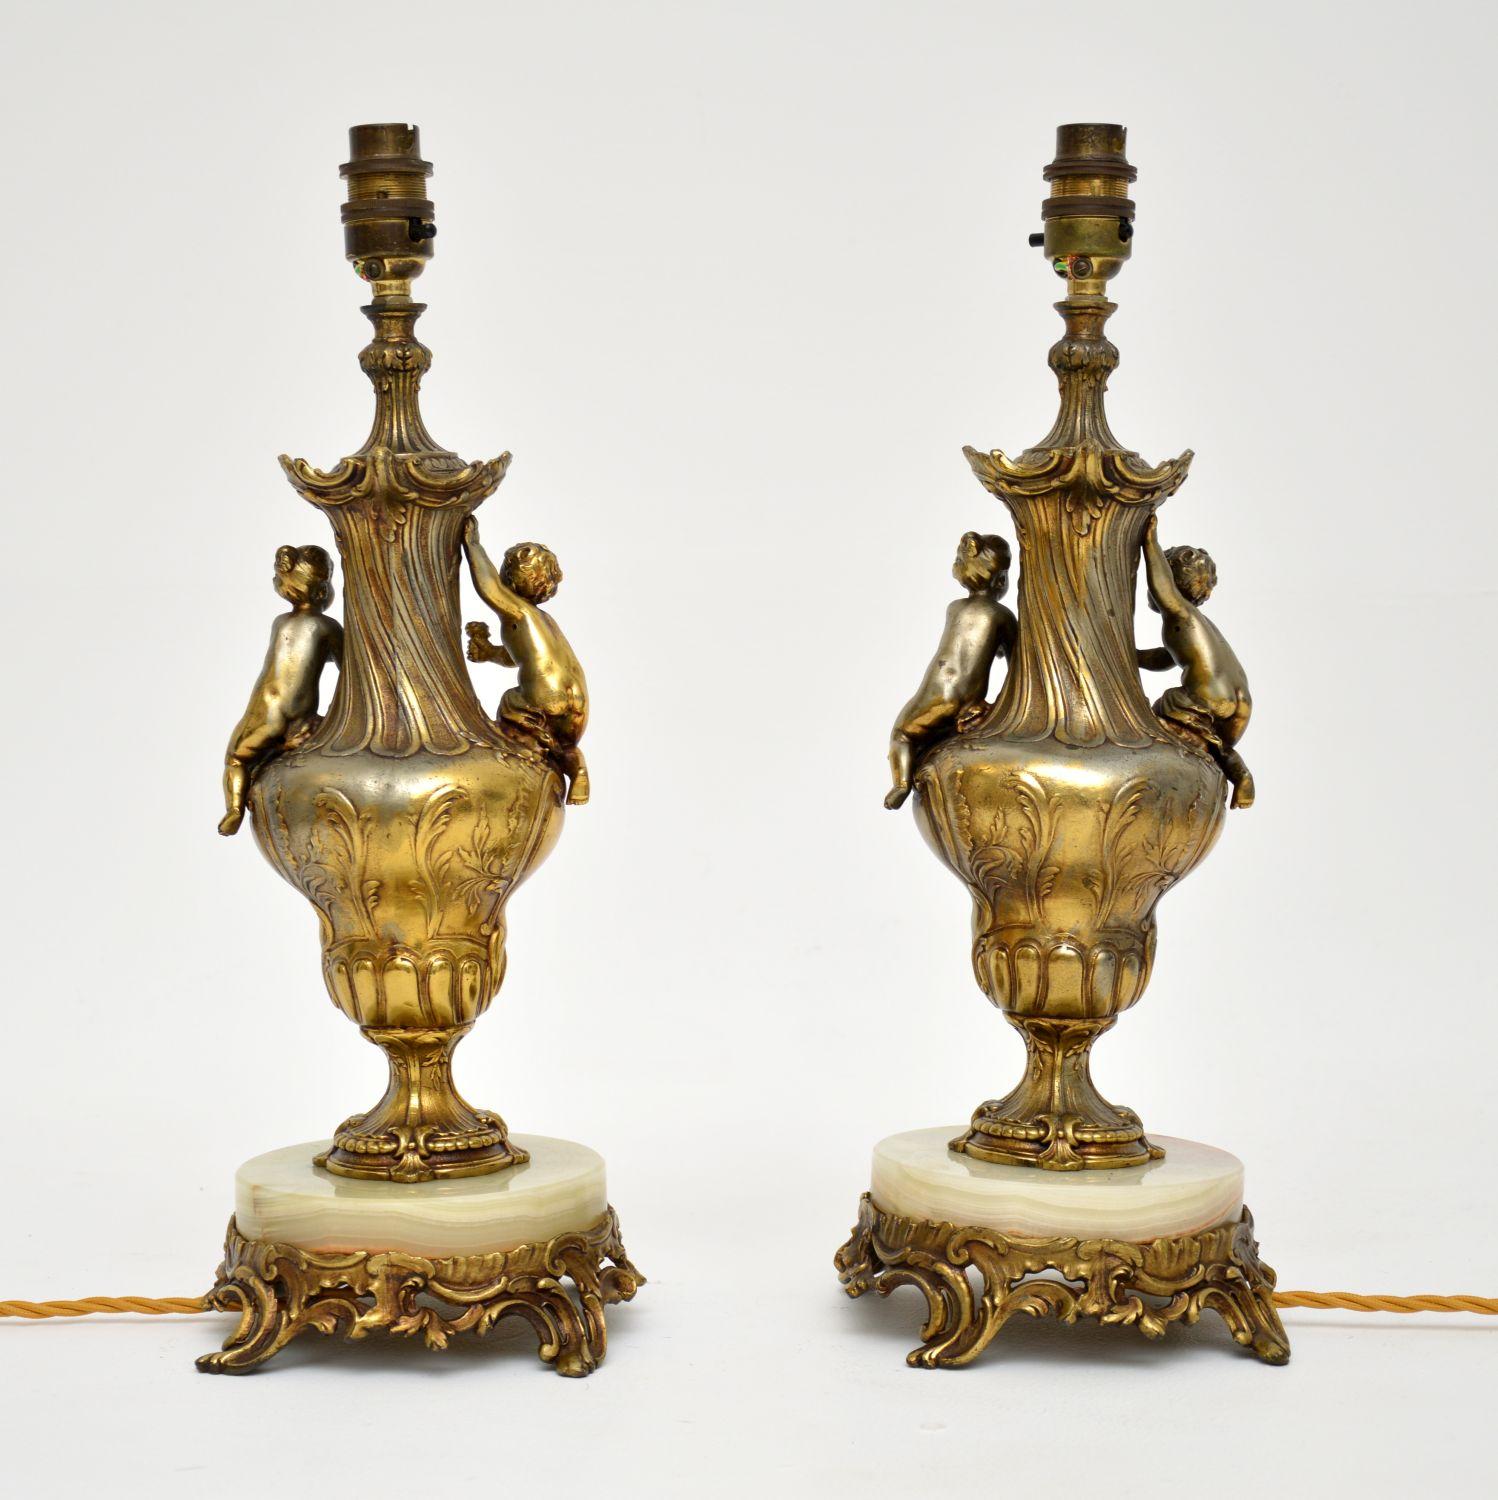 A stunning pair of antique French table lamps in gilt metal and onyx. These were made in France, they date from around the 1920’s period.

They are of lovely quality and depict cherubs around an urn shaped central column. The gilt metal work has